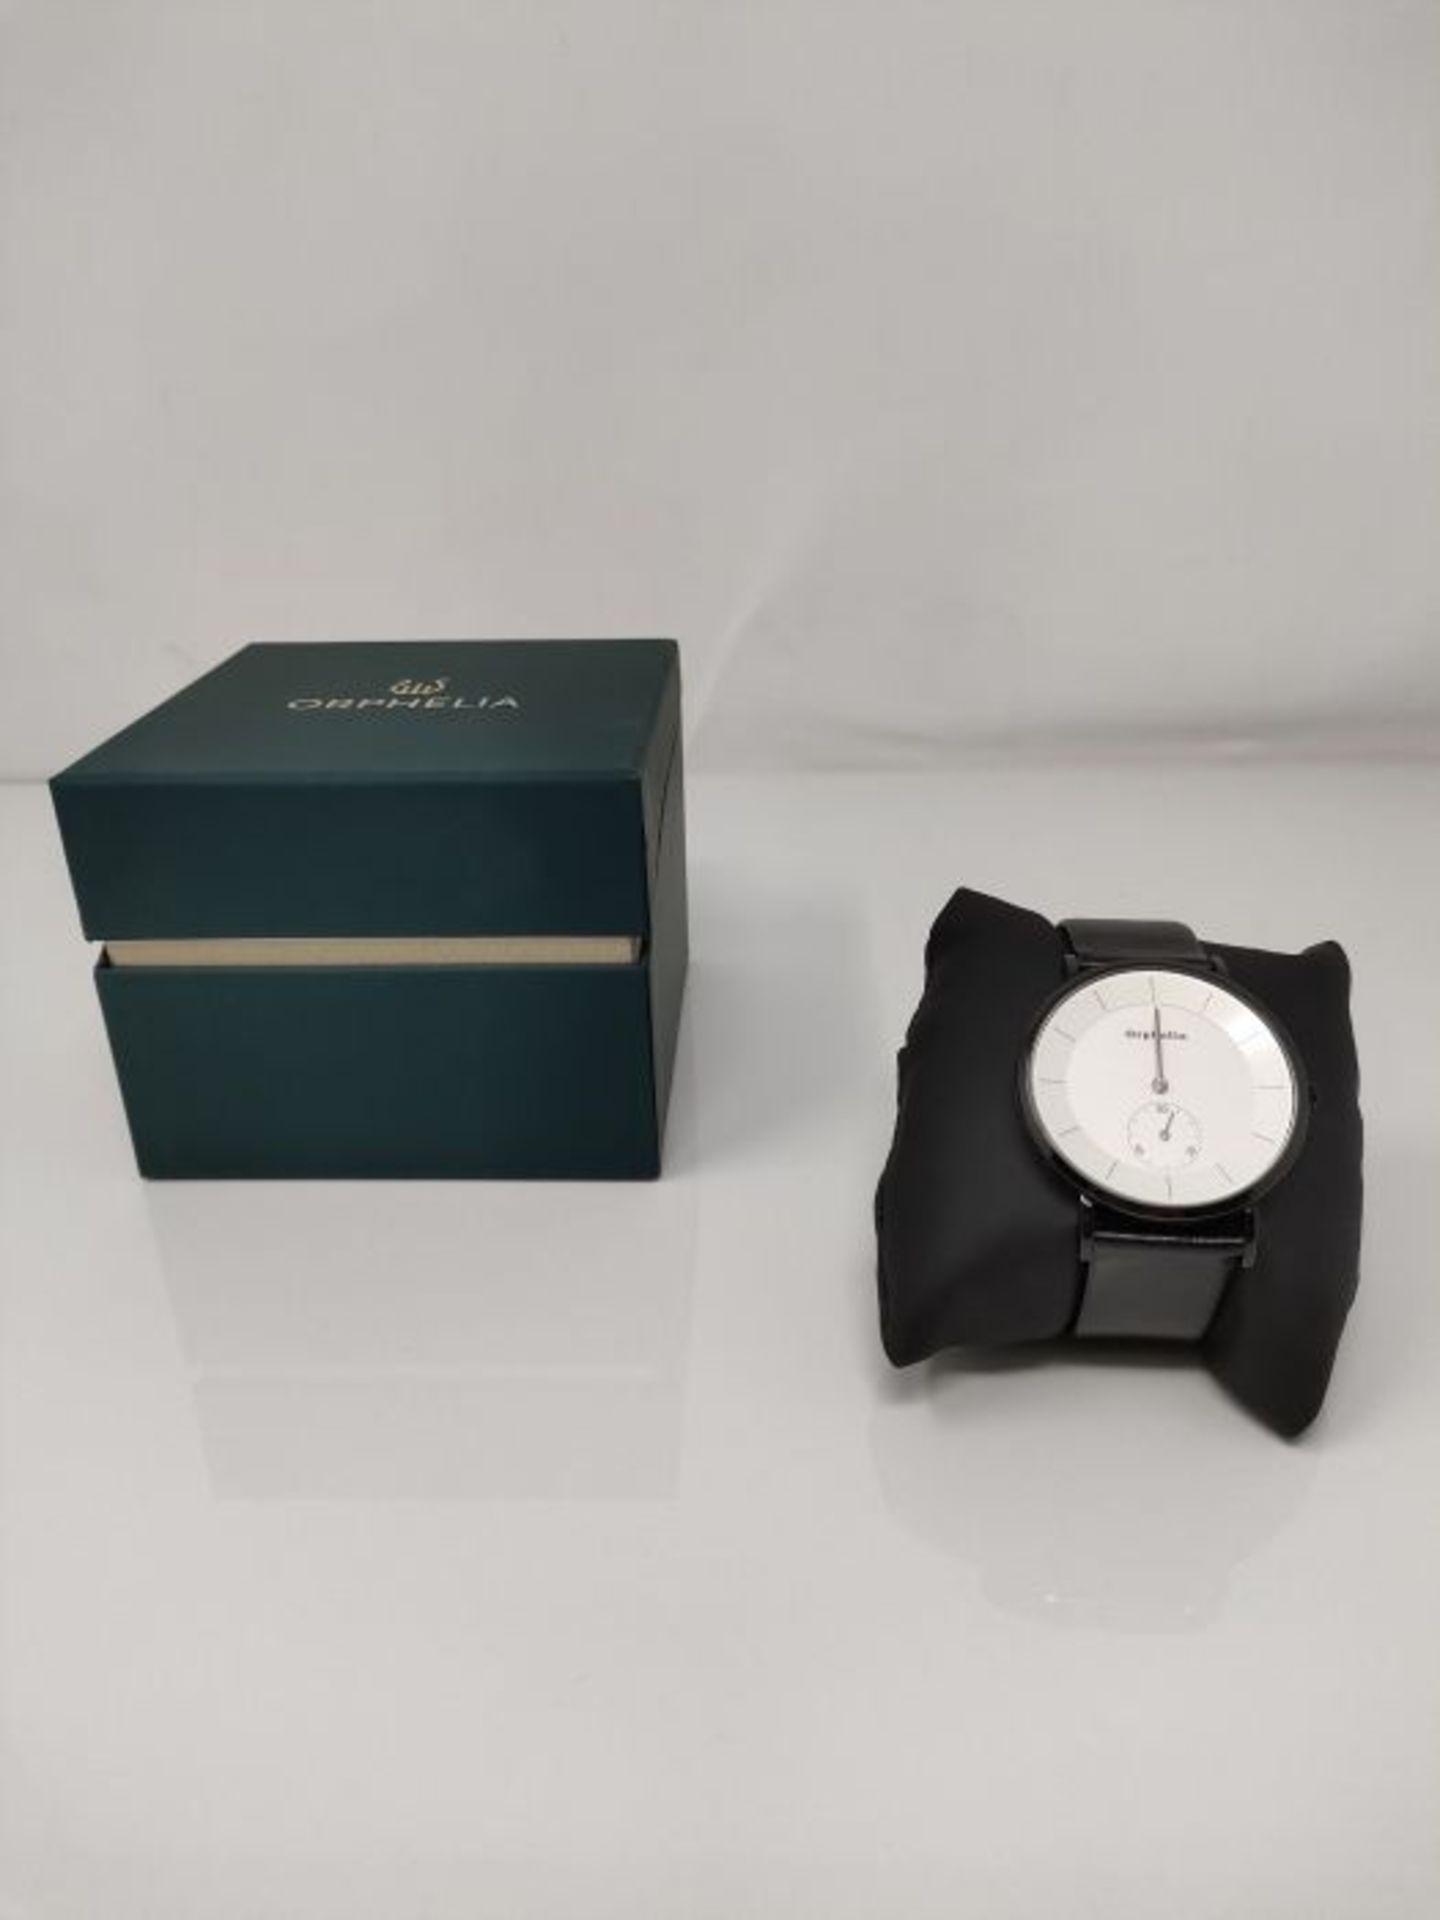 Orphelia Women's Quartz Watch with White Dial and Black Leather Strap - Image 3 of 3